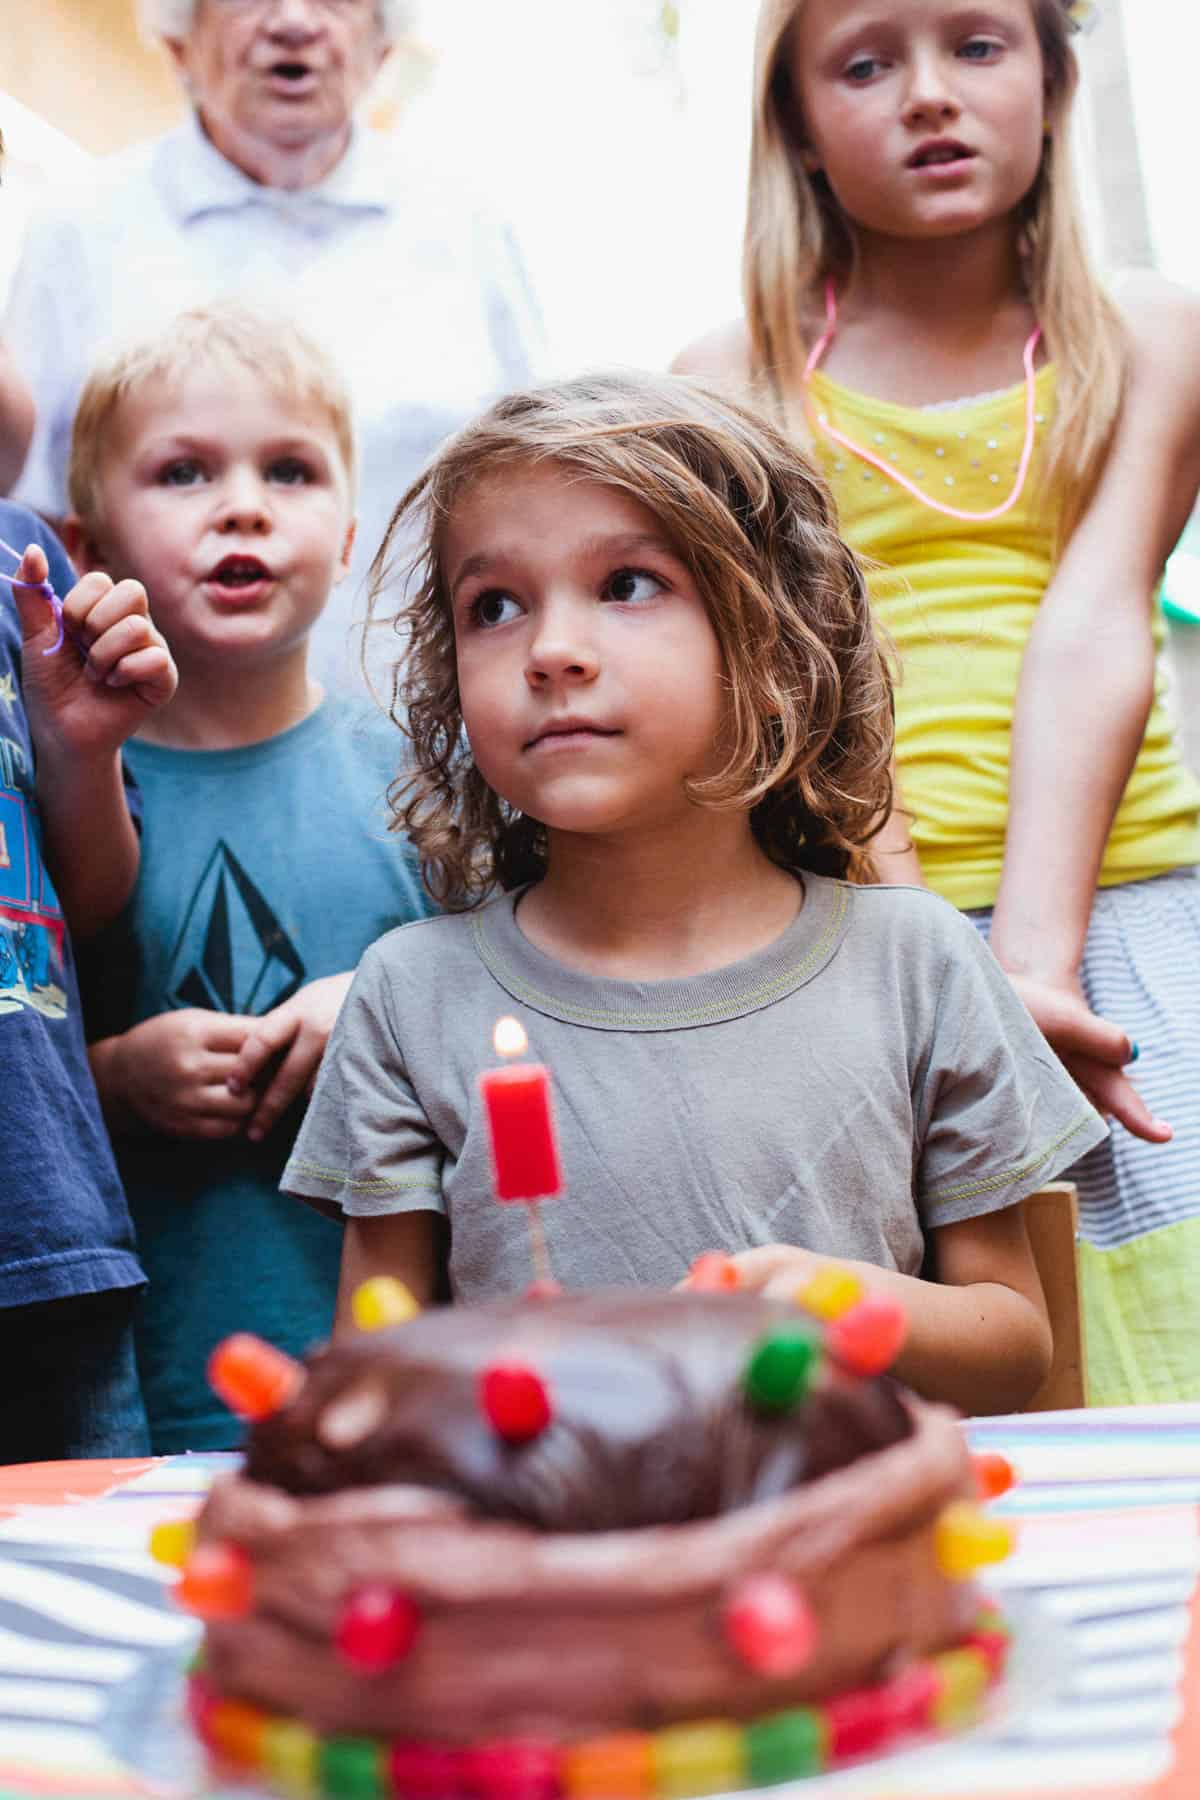 Kids singing happy birthday to a boy at a birthday party in front of his cake.